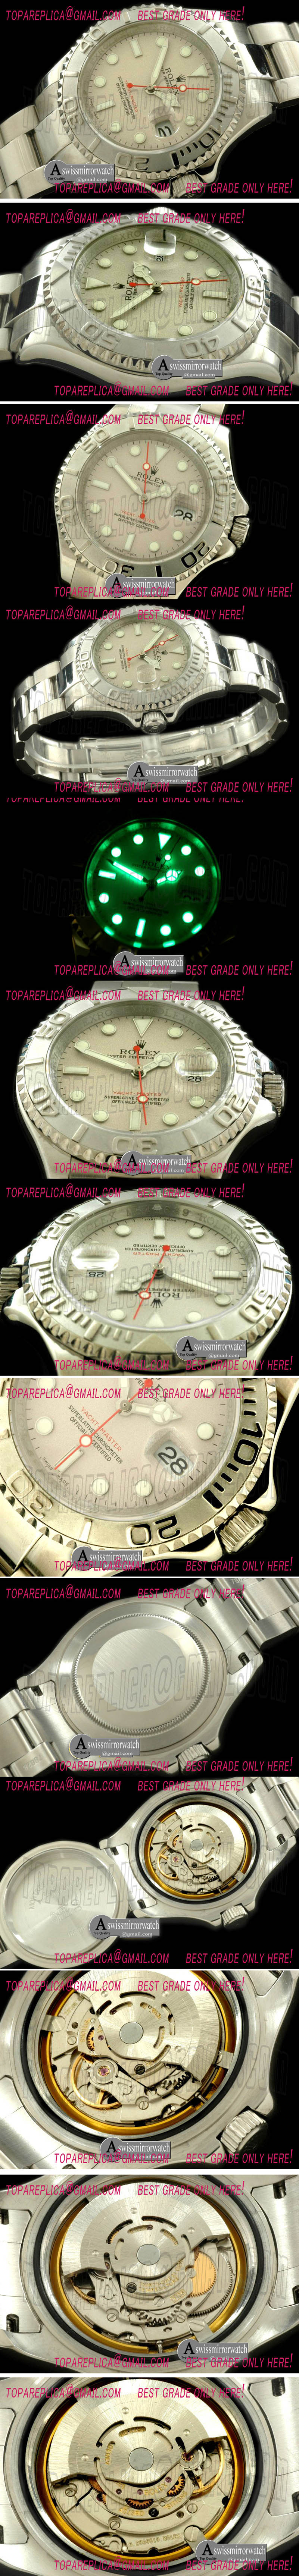 Replica Rolex Yachtmaster Watches